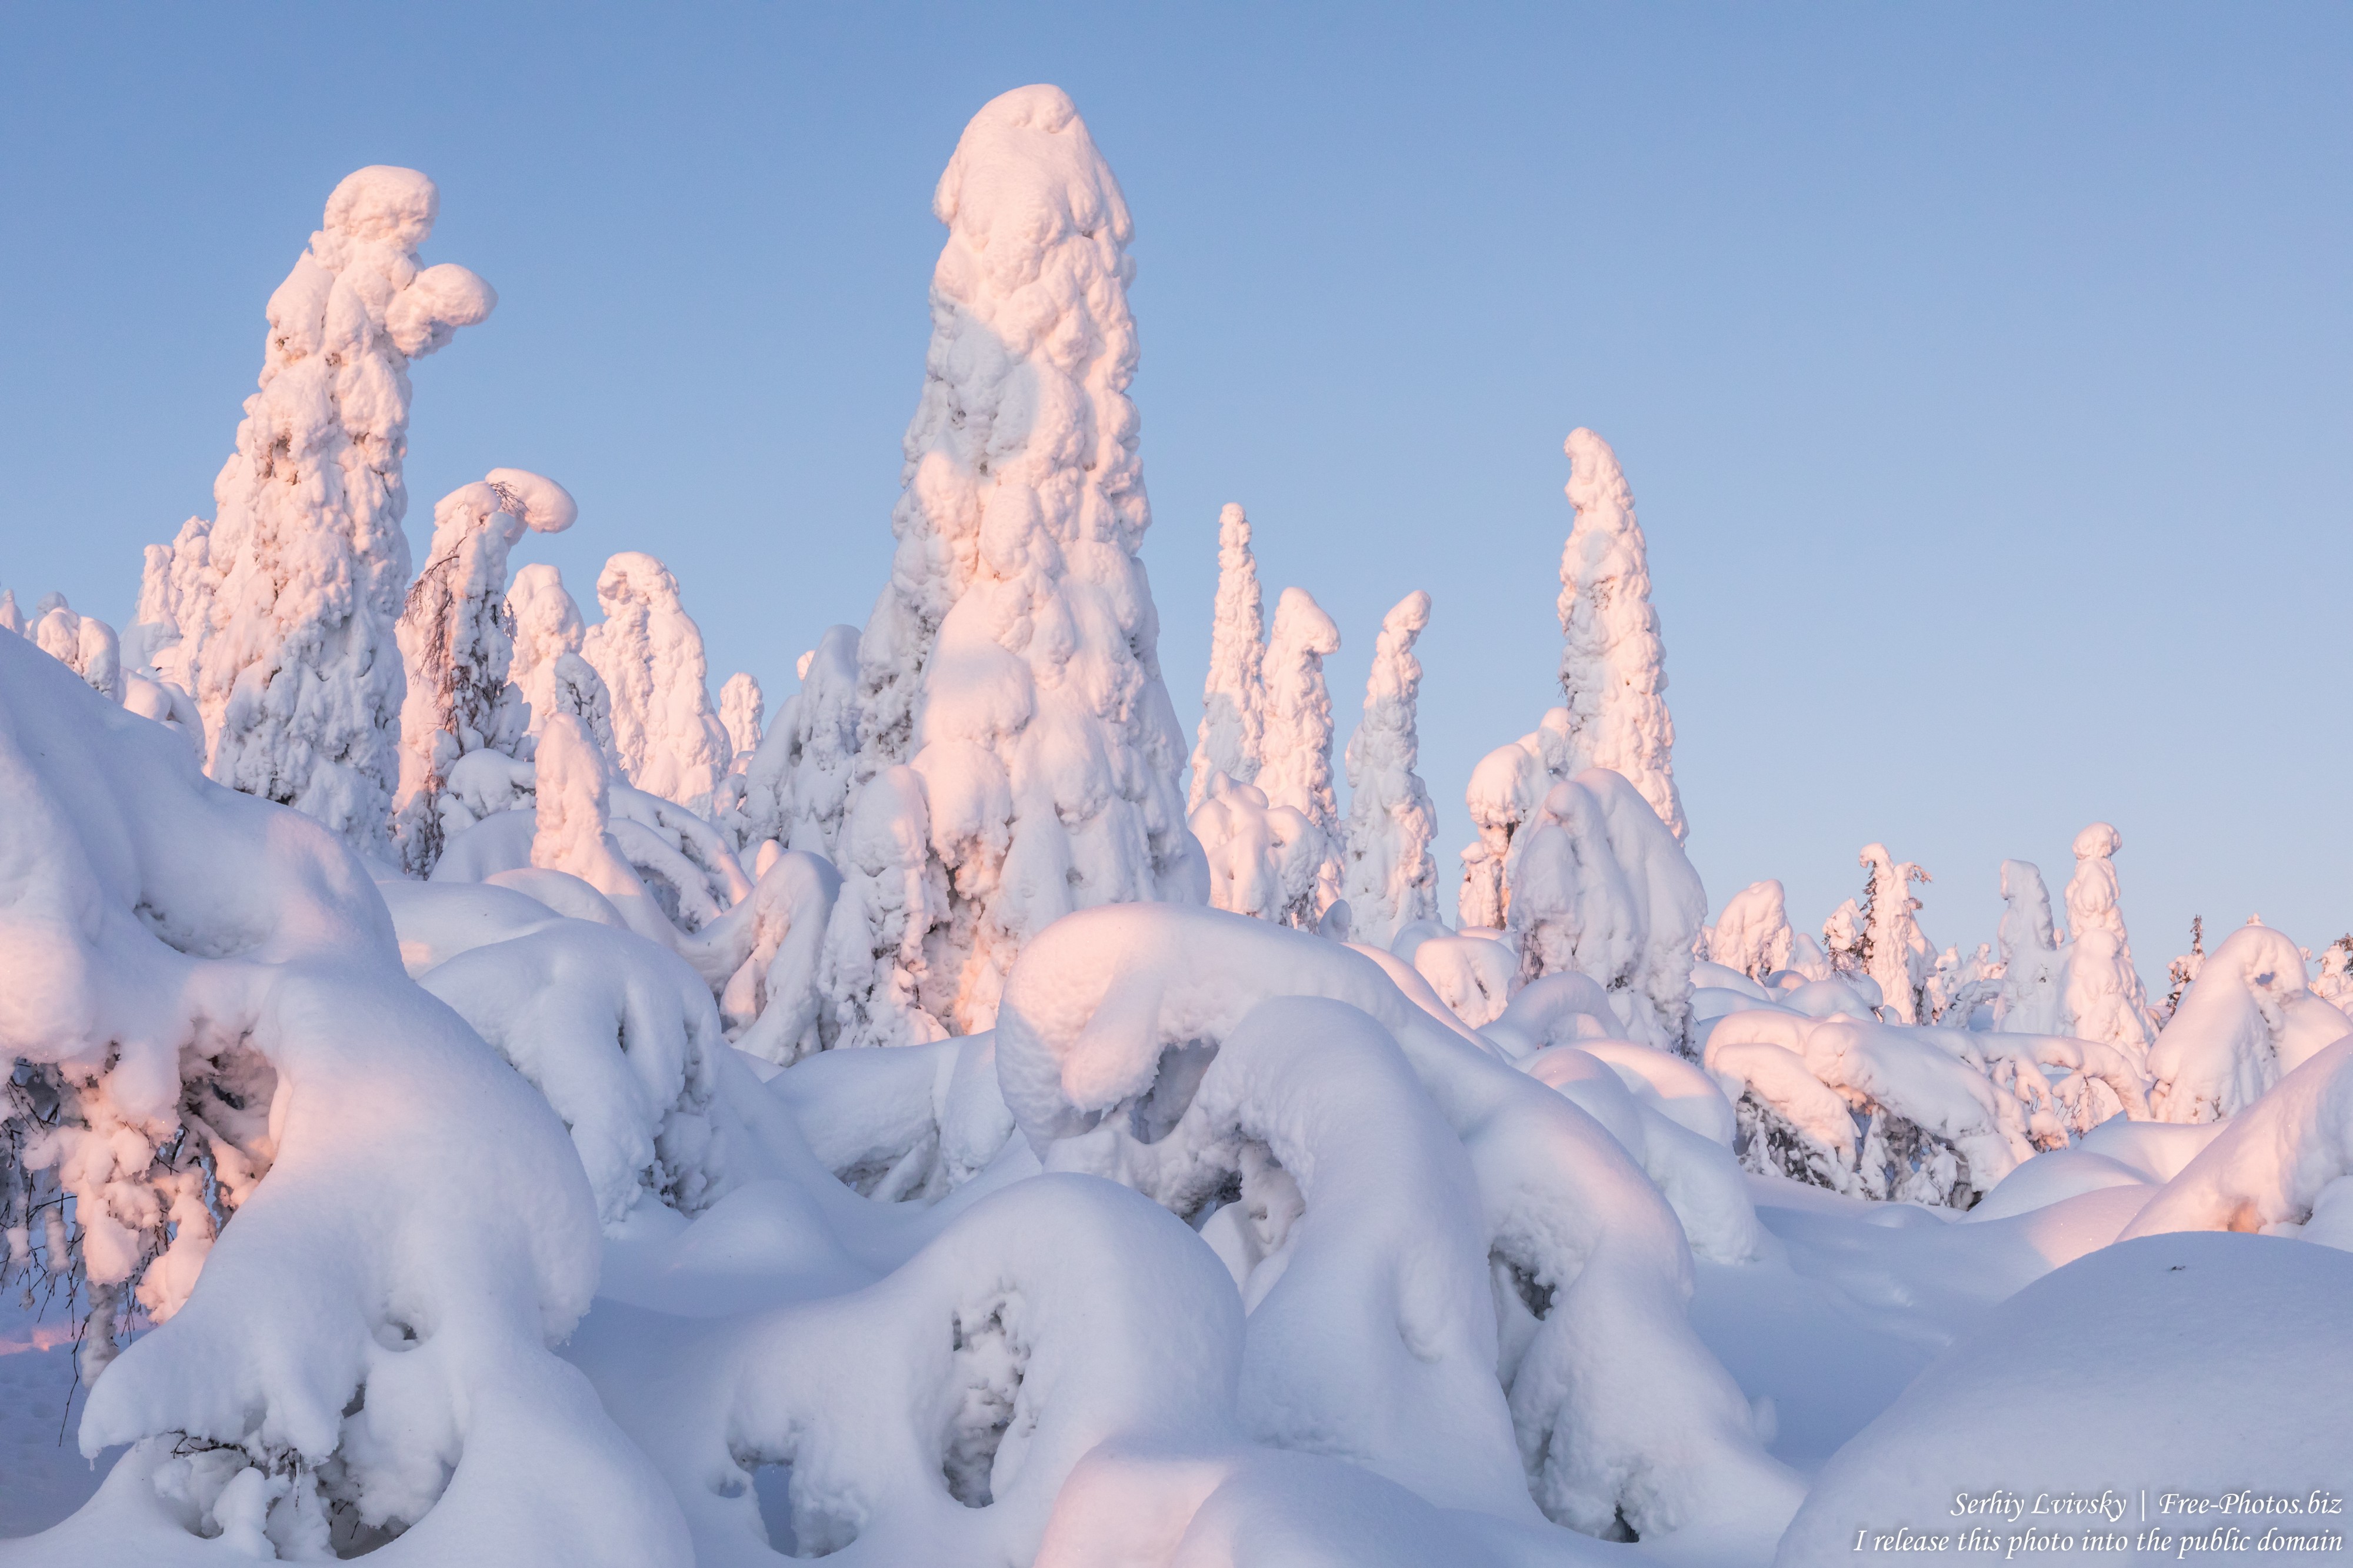 Valtavaara, Finland, photographed in January 2020 by Serhiy Lvivsky, picture 18